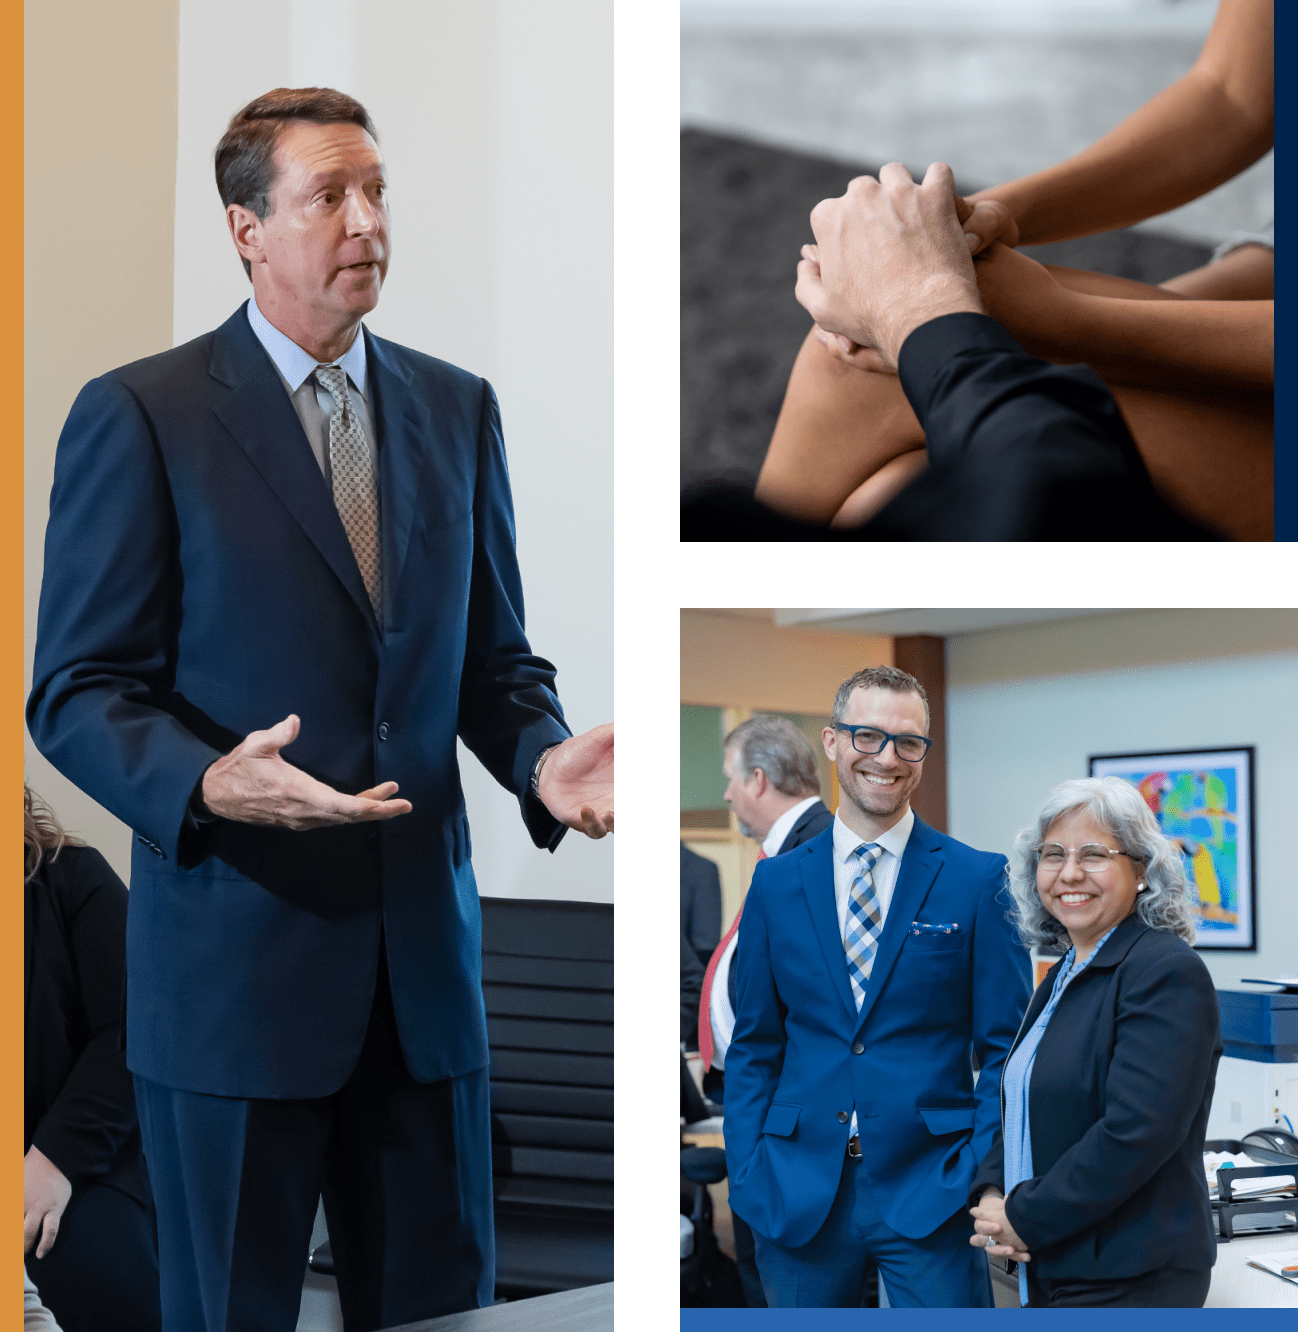 Collage: engaging speaker, team unity gesture, law firm staff portrait.